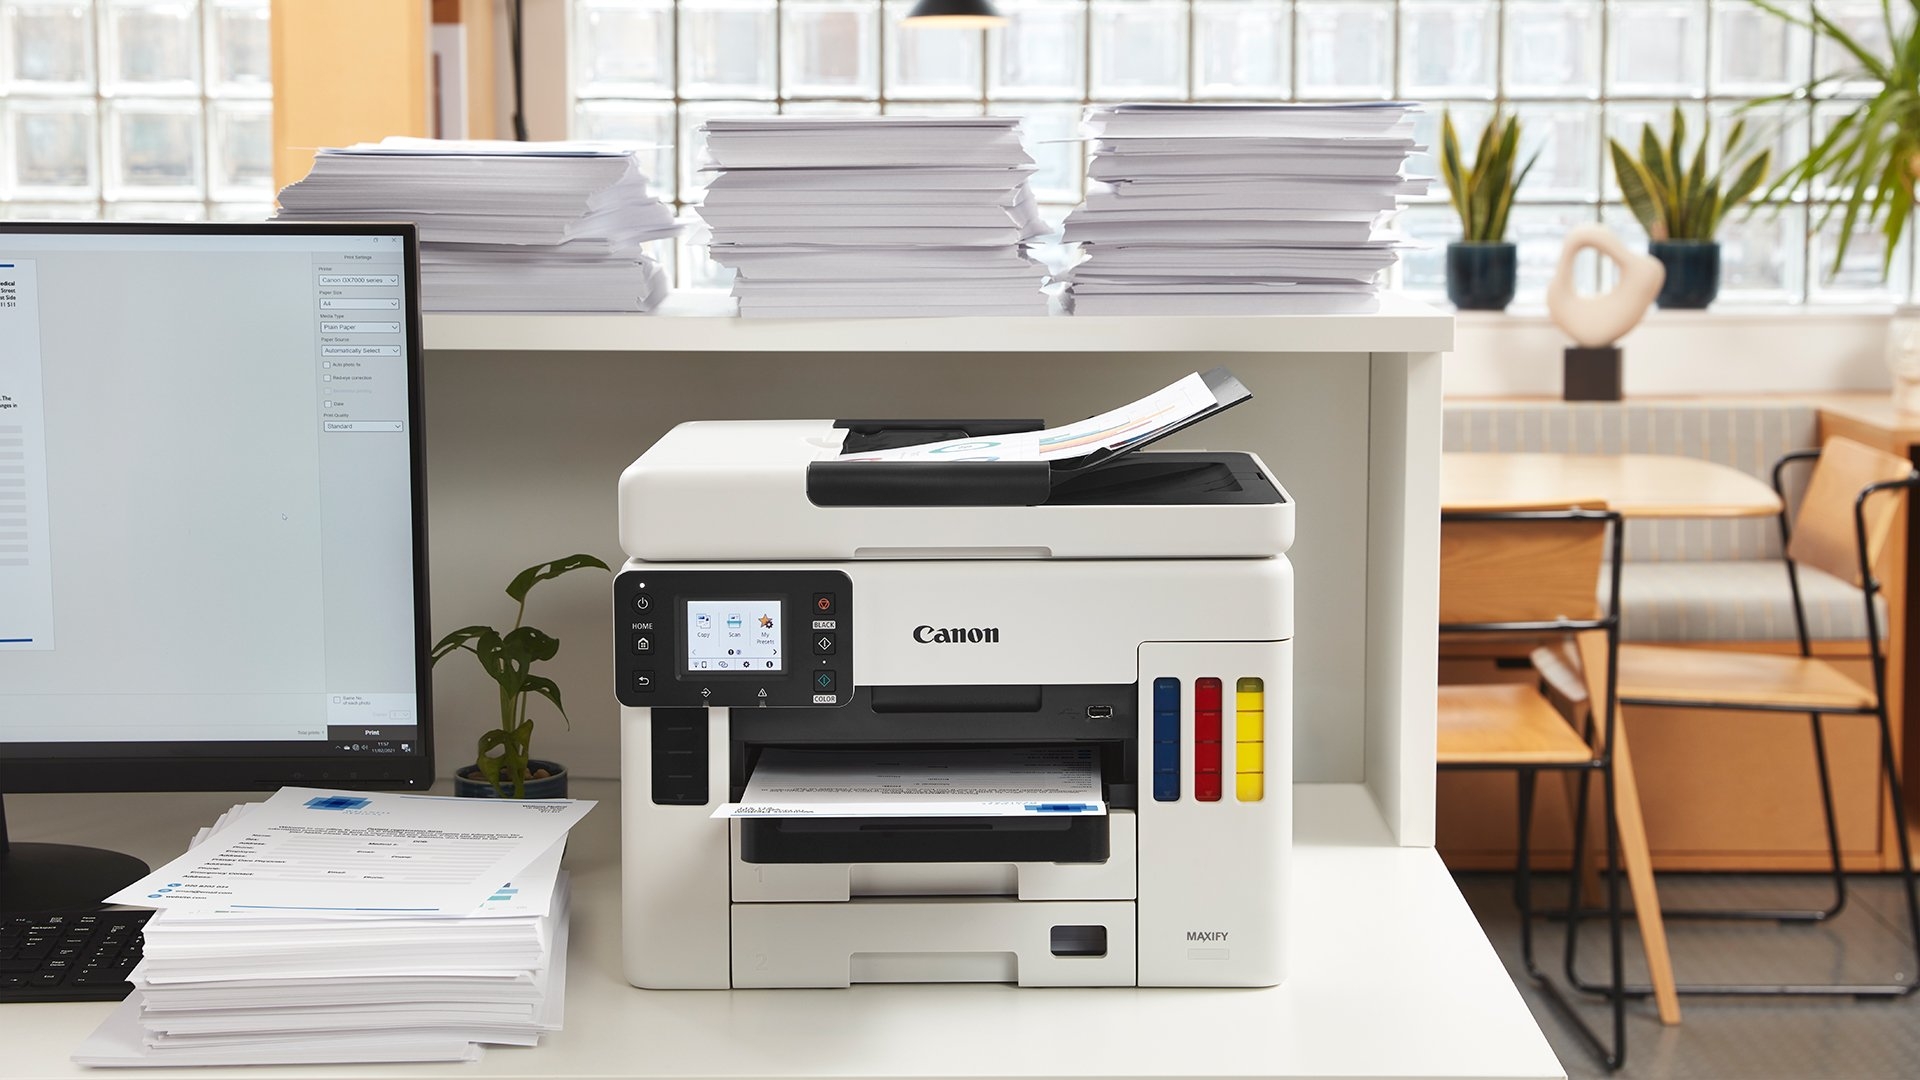 How to Install Canon MAXIFY Printer in Ubuntu - Featured